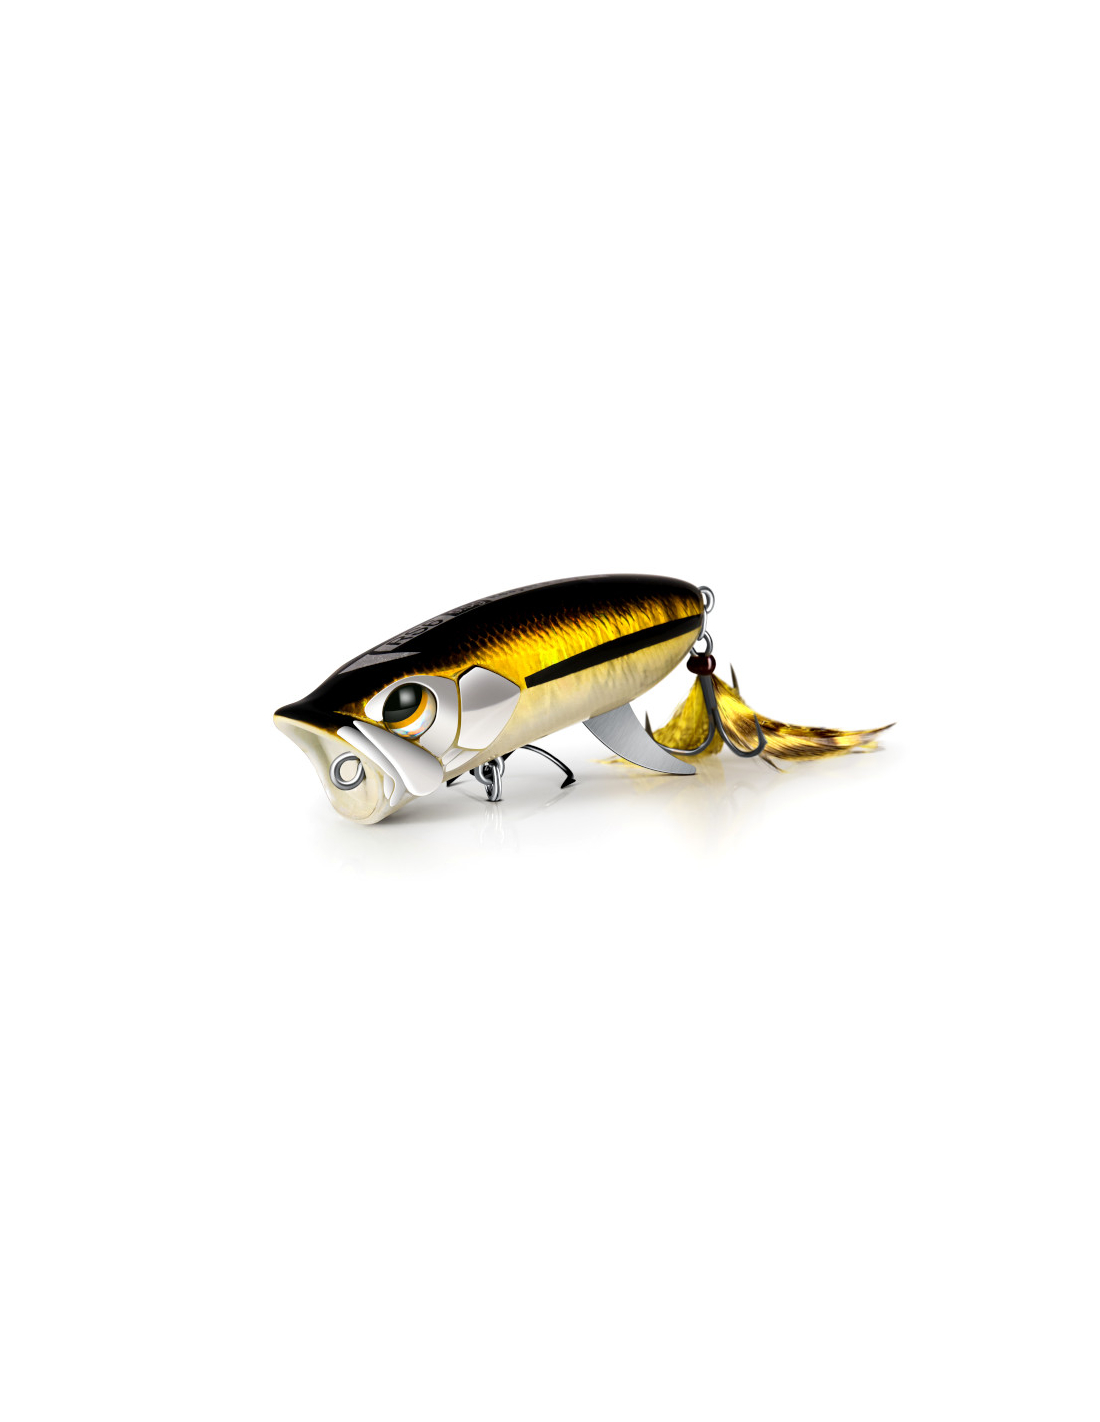  Lurefans RS6 Popper Fishing Lure, Top Water Baits For Bass  Fishing, Stabilizing Tail Fin, 2.36 1/3 Oz, Floating, VMC 8570 Hooks,  Feathered, Topwater Popper Fishing Lures For Bass, Pike, Musky Walleye